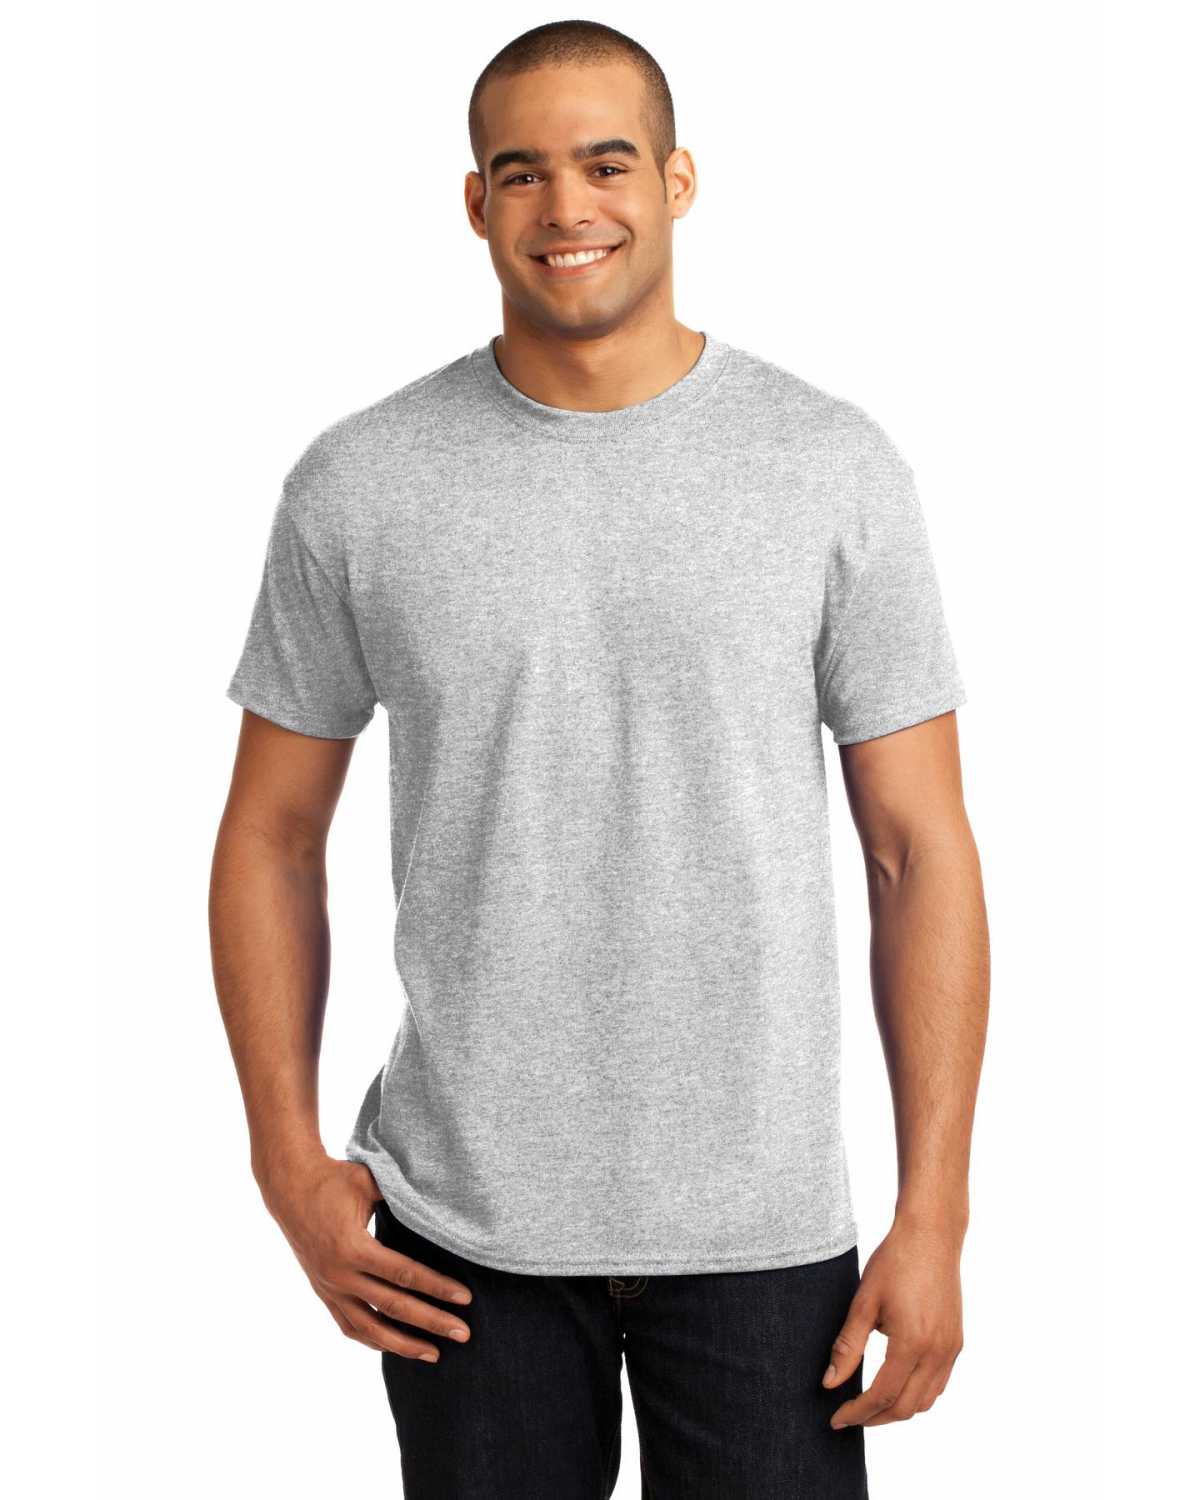 Hanes 5170 EcoSmart 50/50 Cotton/Poly T-Shirt on discount ...